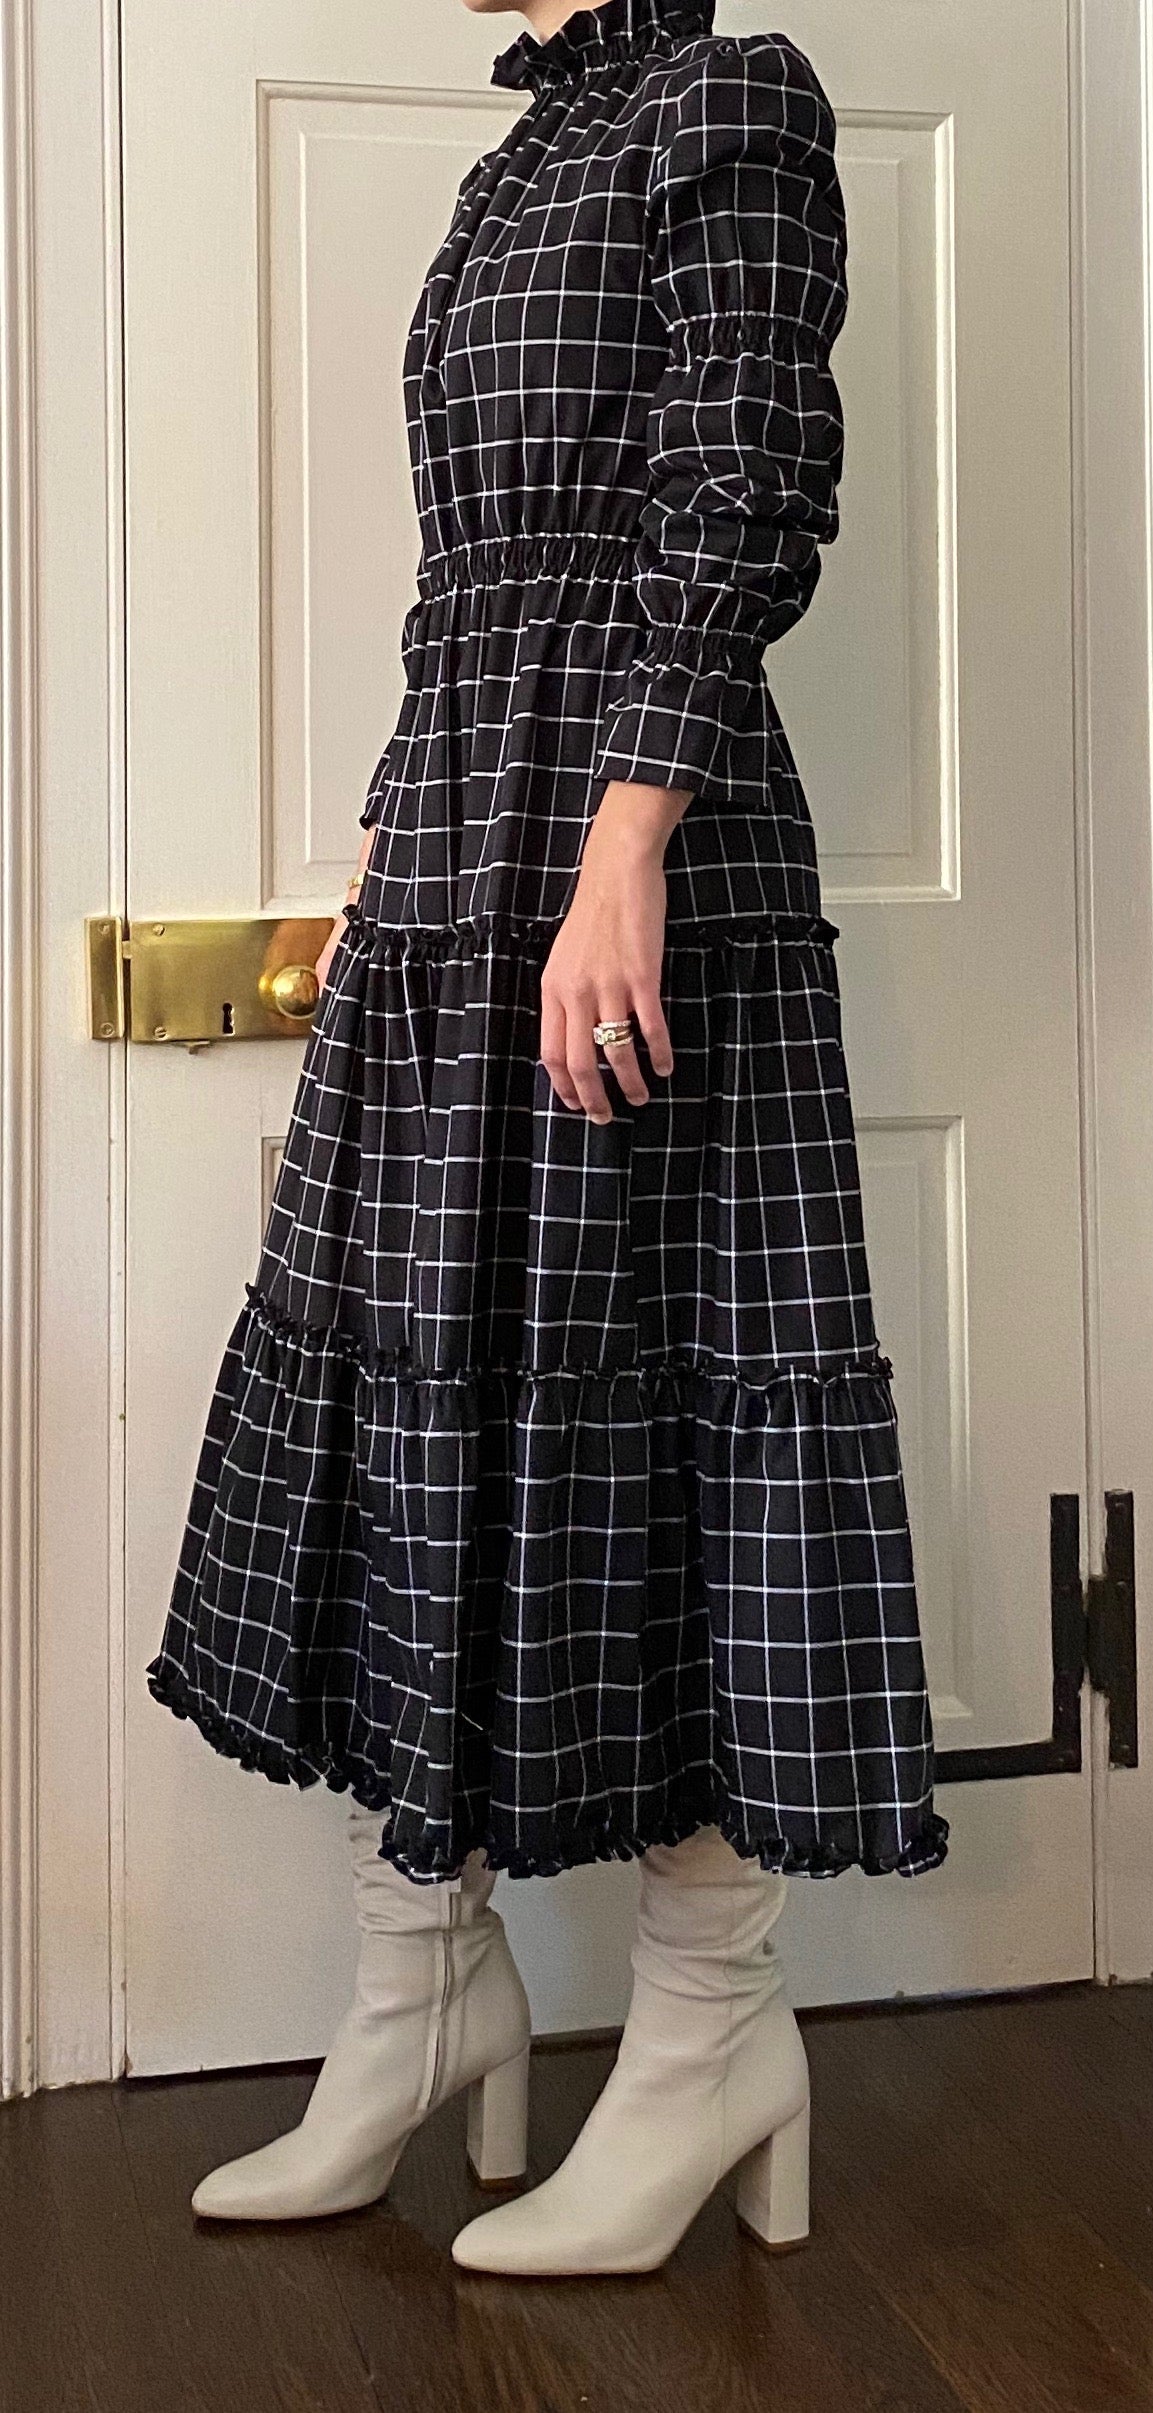 Alden Dress in Windowpane Check - CCH Collection